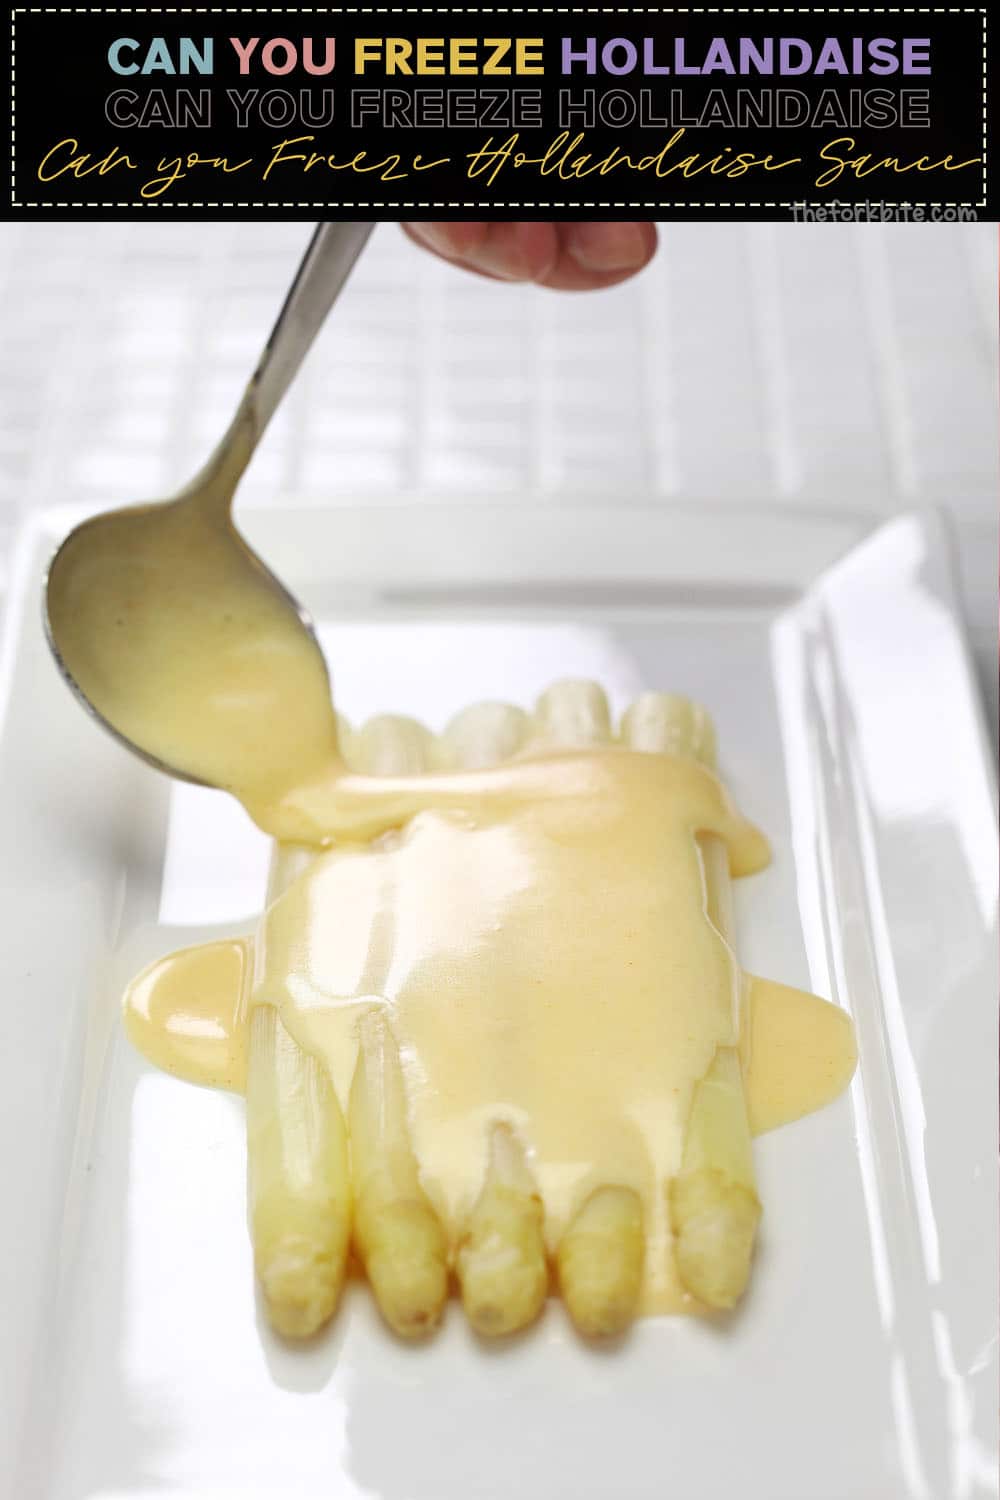 Yes, you can freeze hollandaise sauce but it would be best to learn the proper storing technique so your Hollandaise sauce won’t end up separating